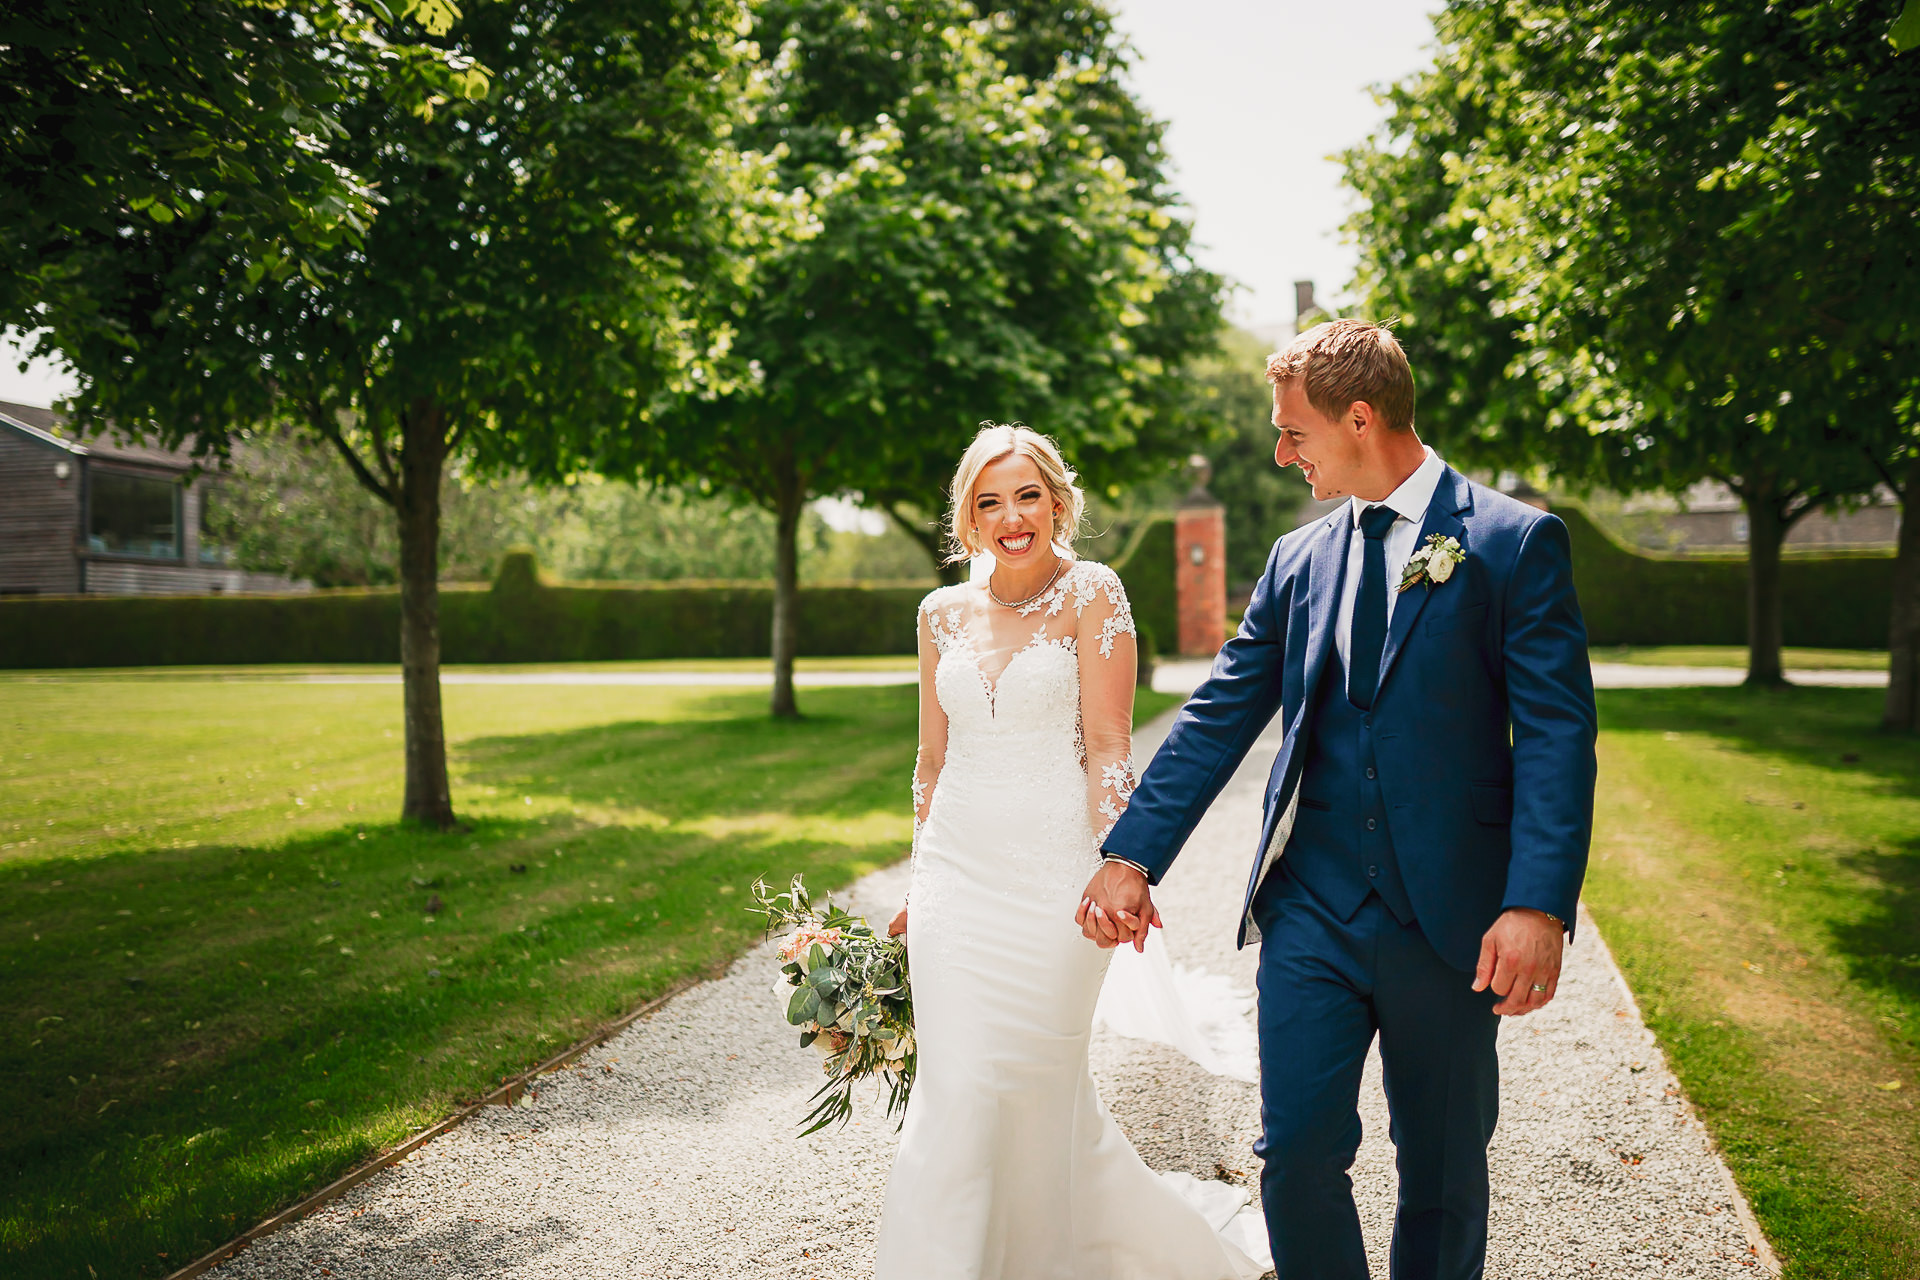 A bride and groom walk, hand-in-hand through the grounds of Kingston estate in Devon